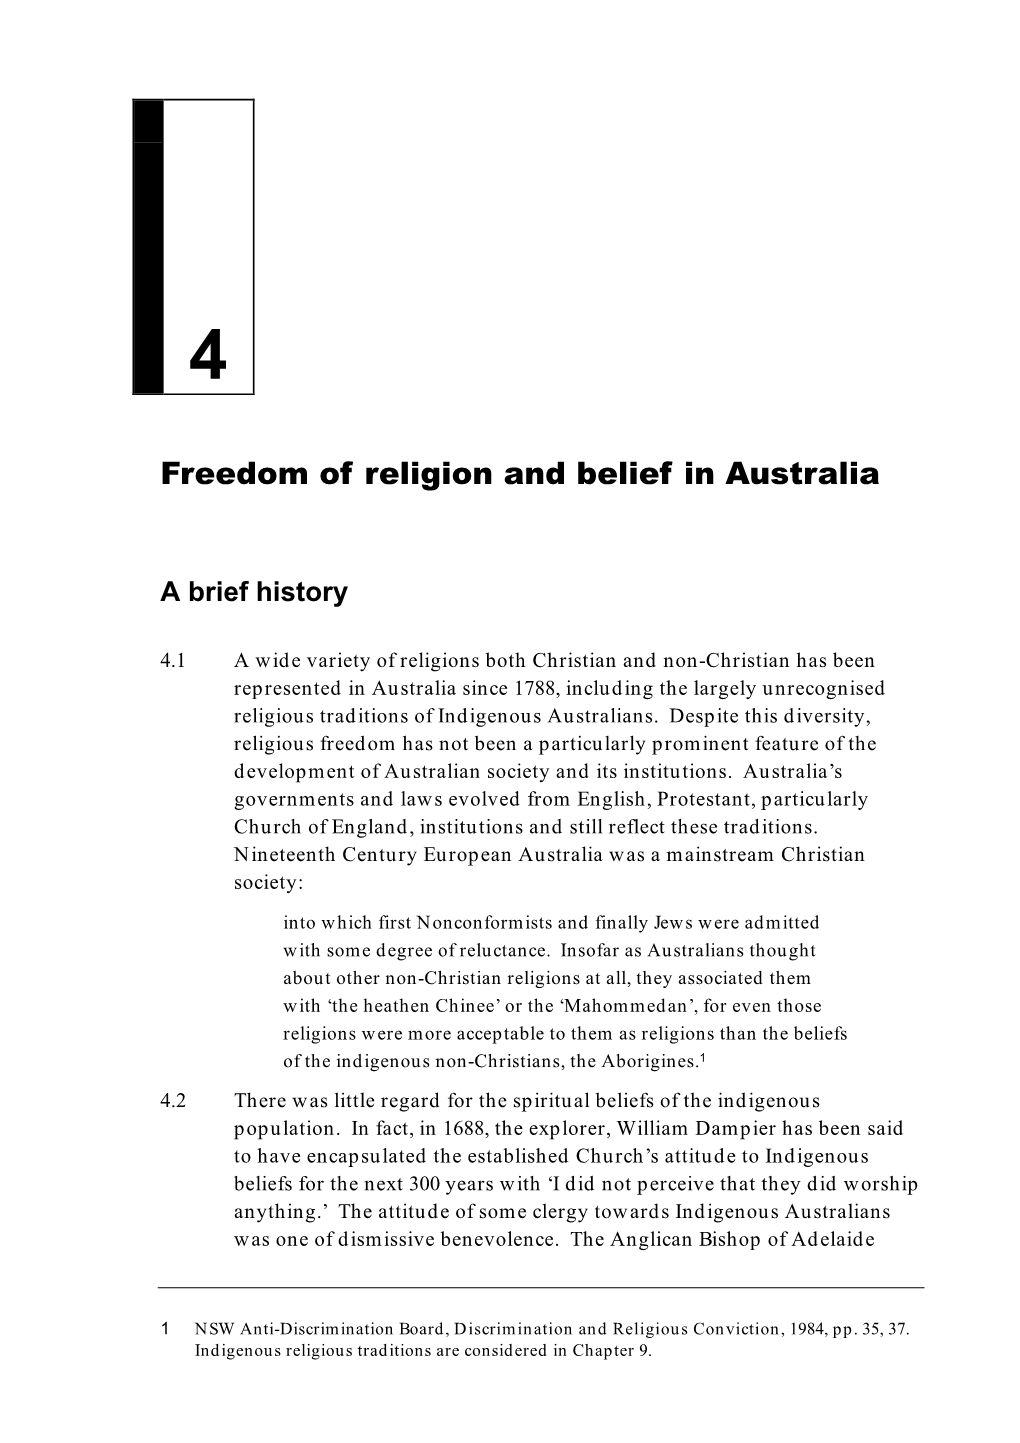 Chapter 4: Freedom of Religion and Belief in Australia